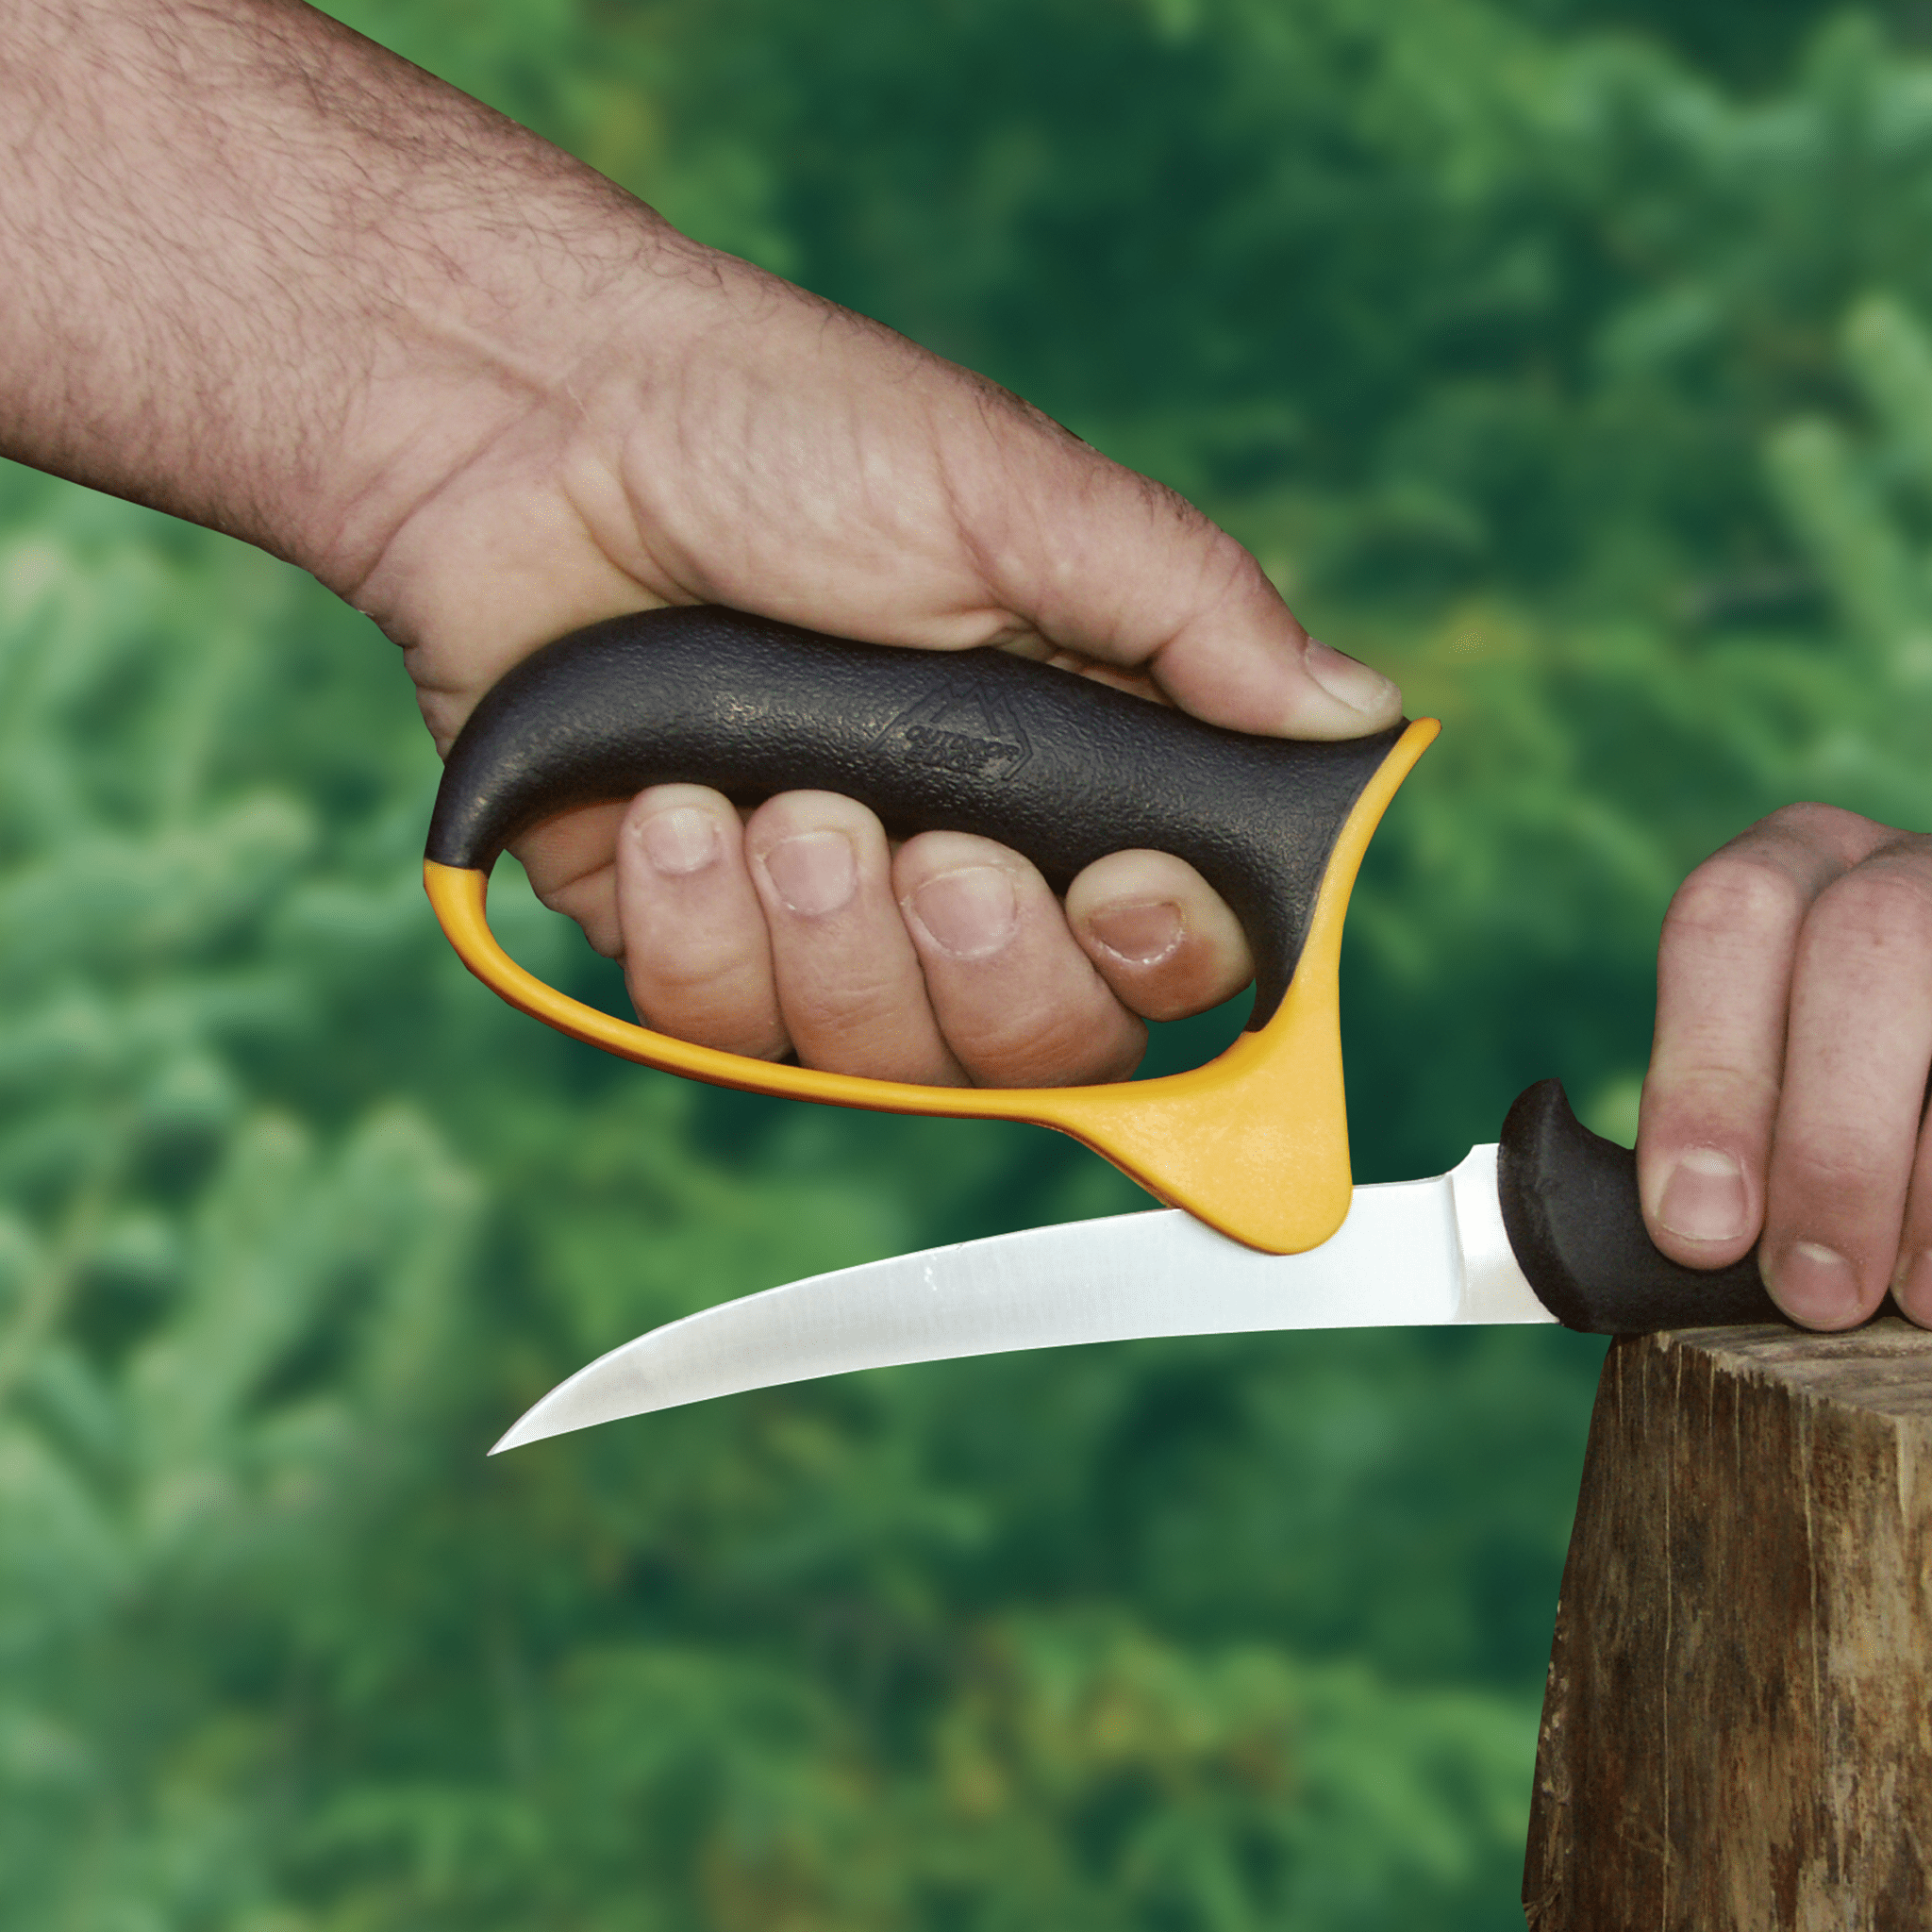 How To Sharpen Outdoor Hand Tools